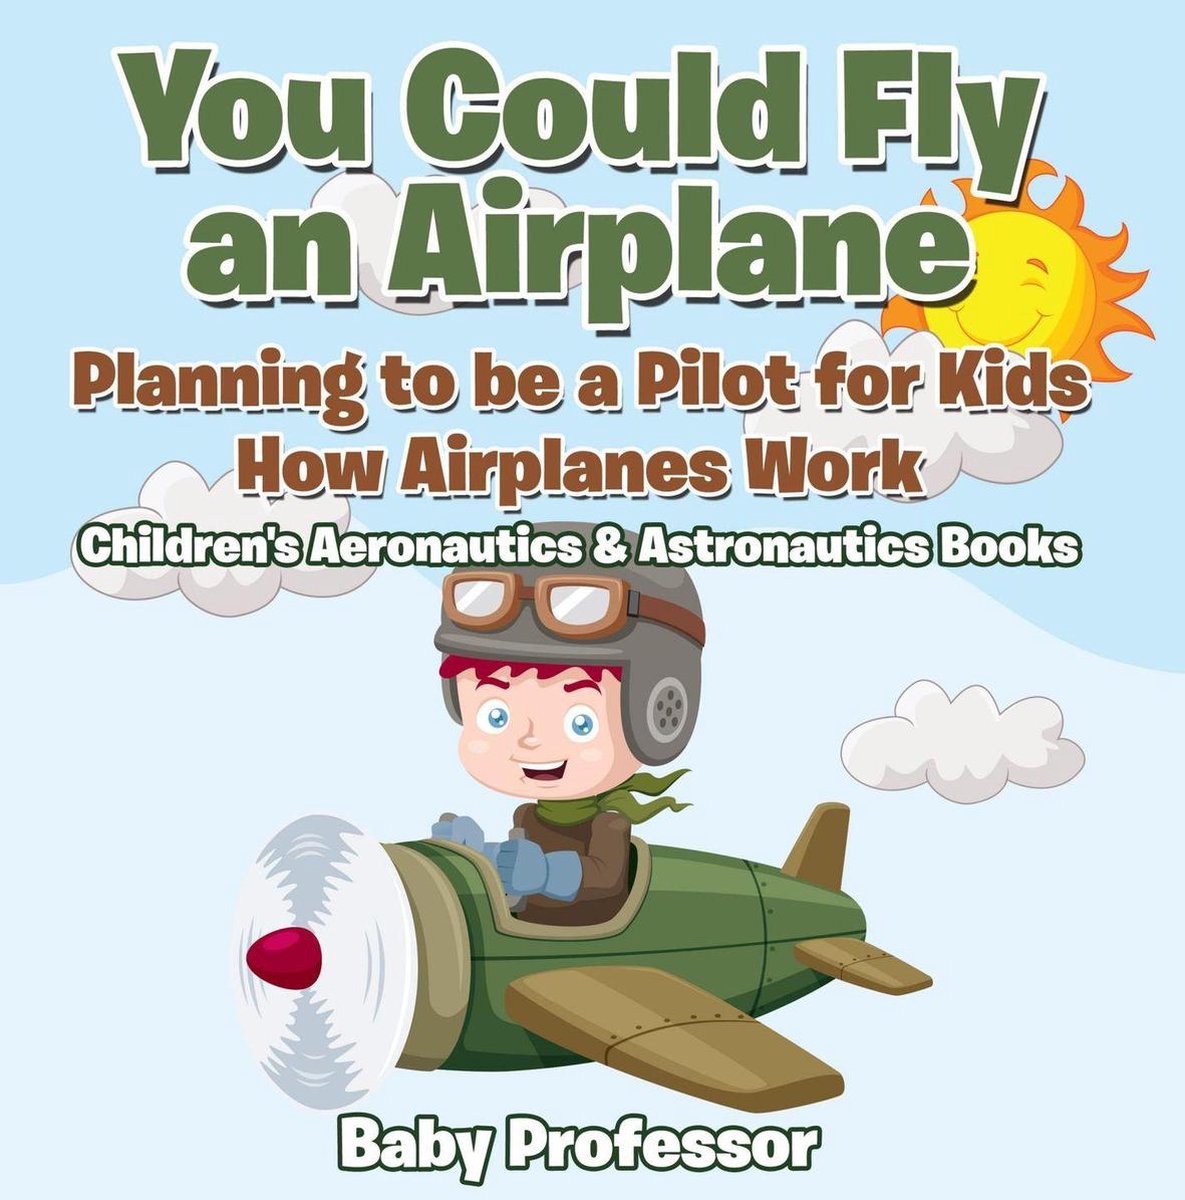 Pilot For Kids How Airplanes Work